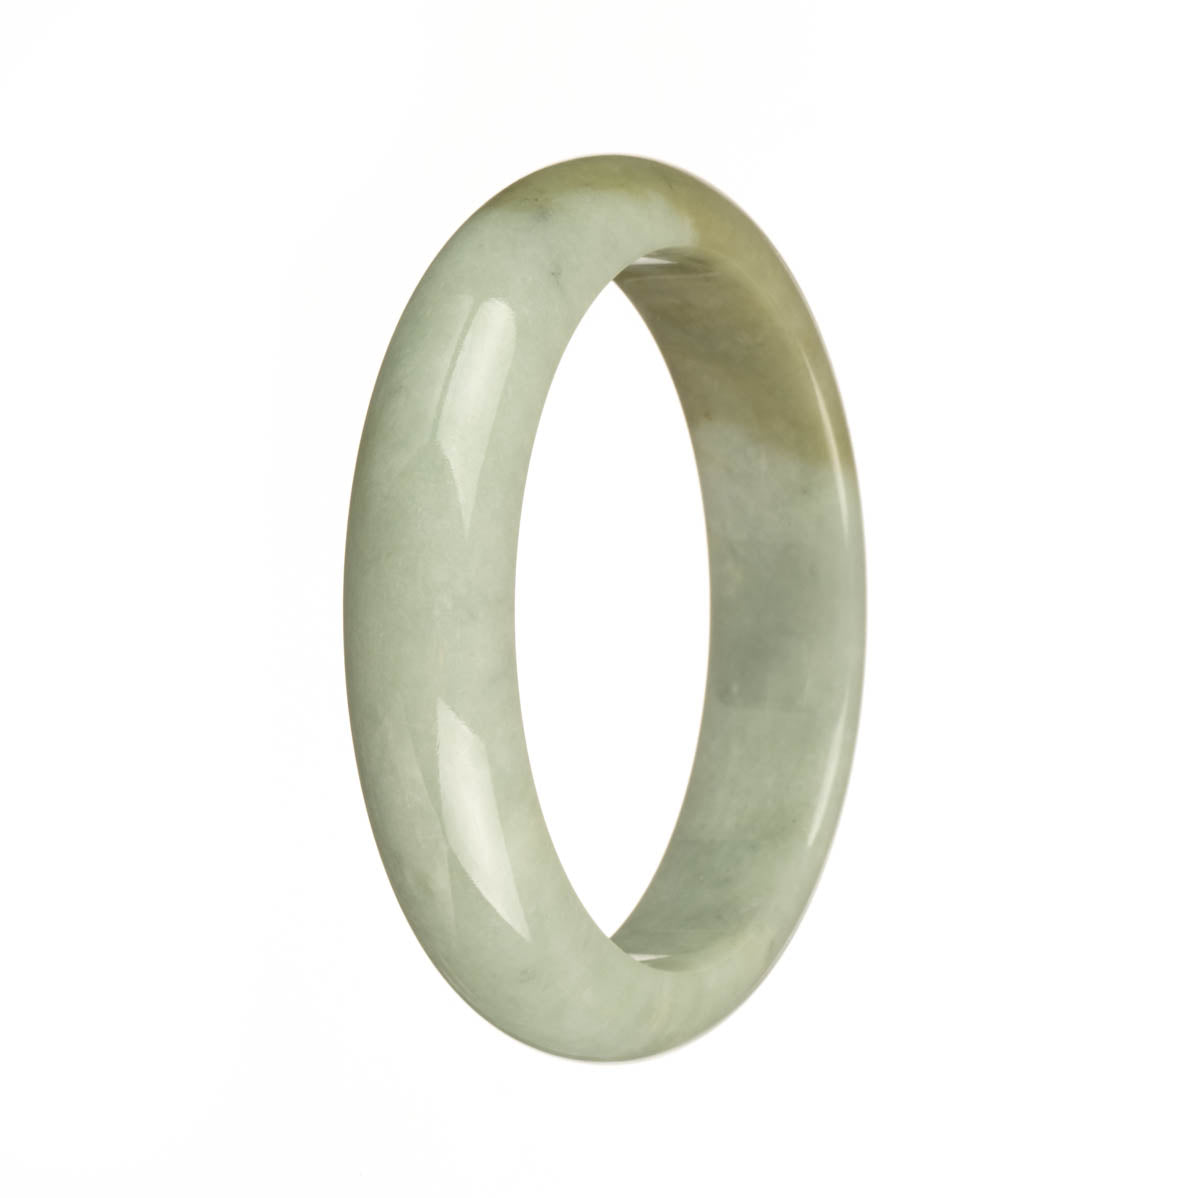 Genuine Grade A Green with Olive Green Patches Jadeite Jade Bangle Bracelet - 57mm Half Moon